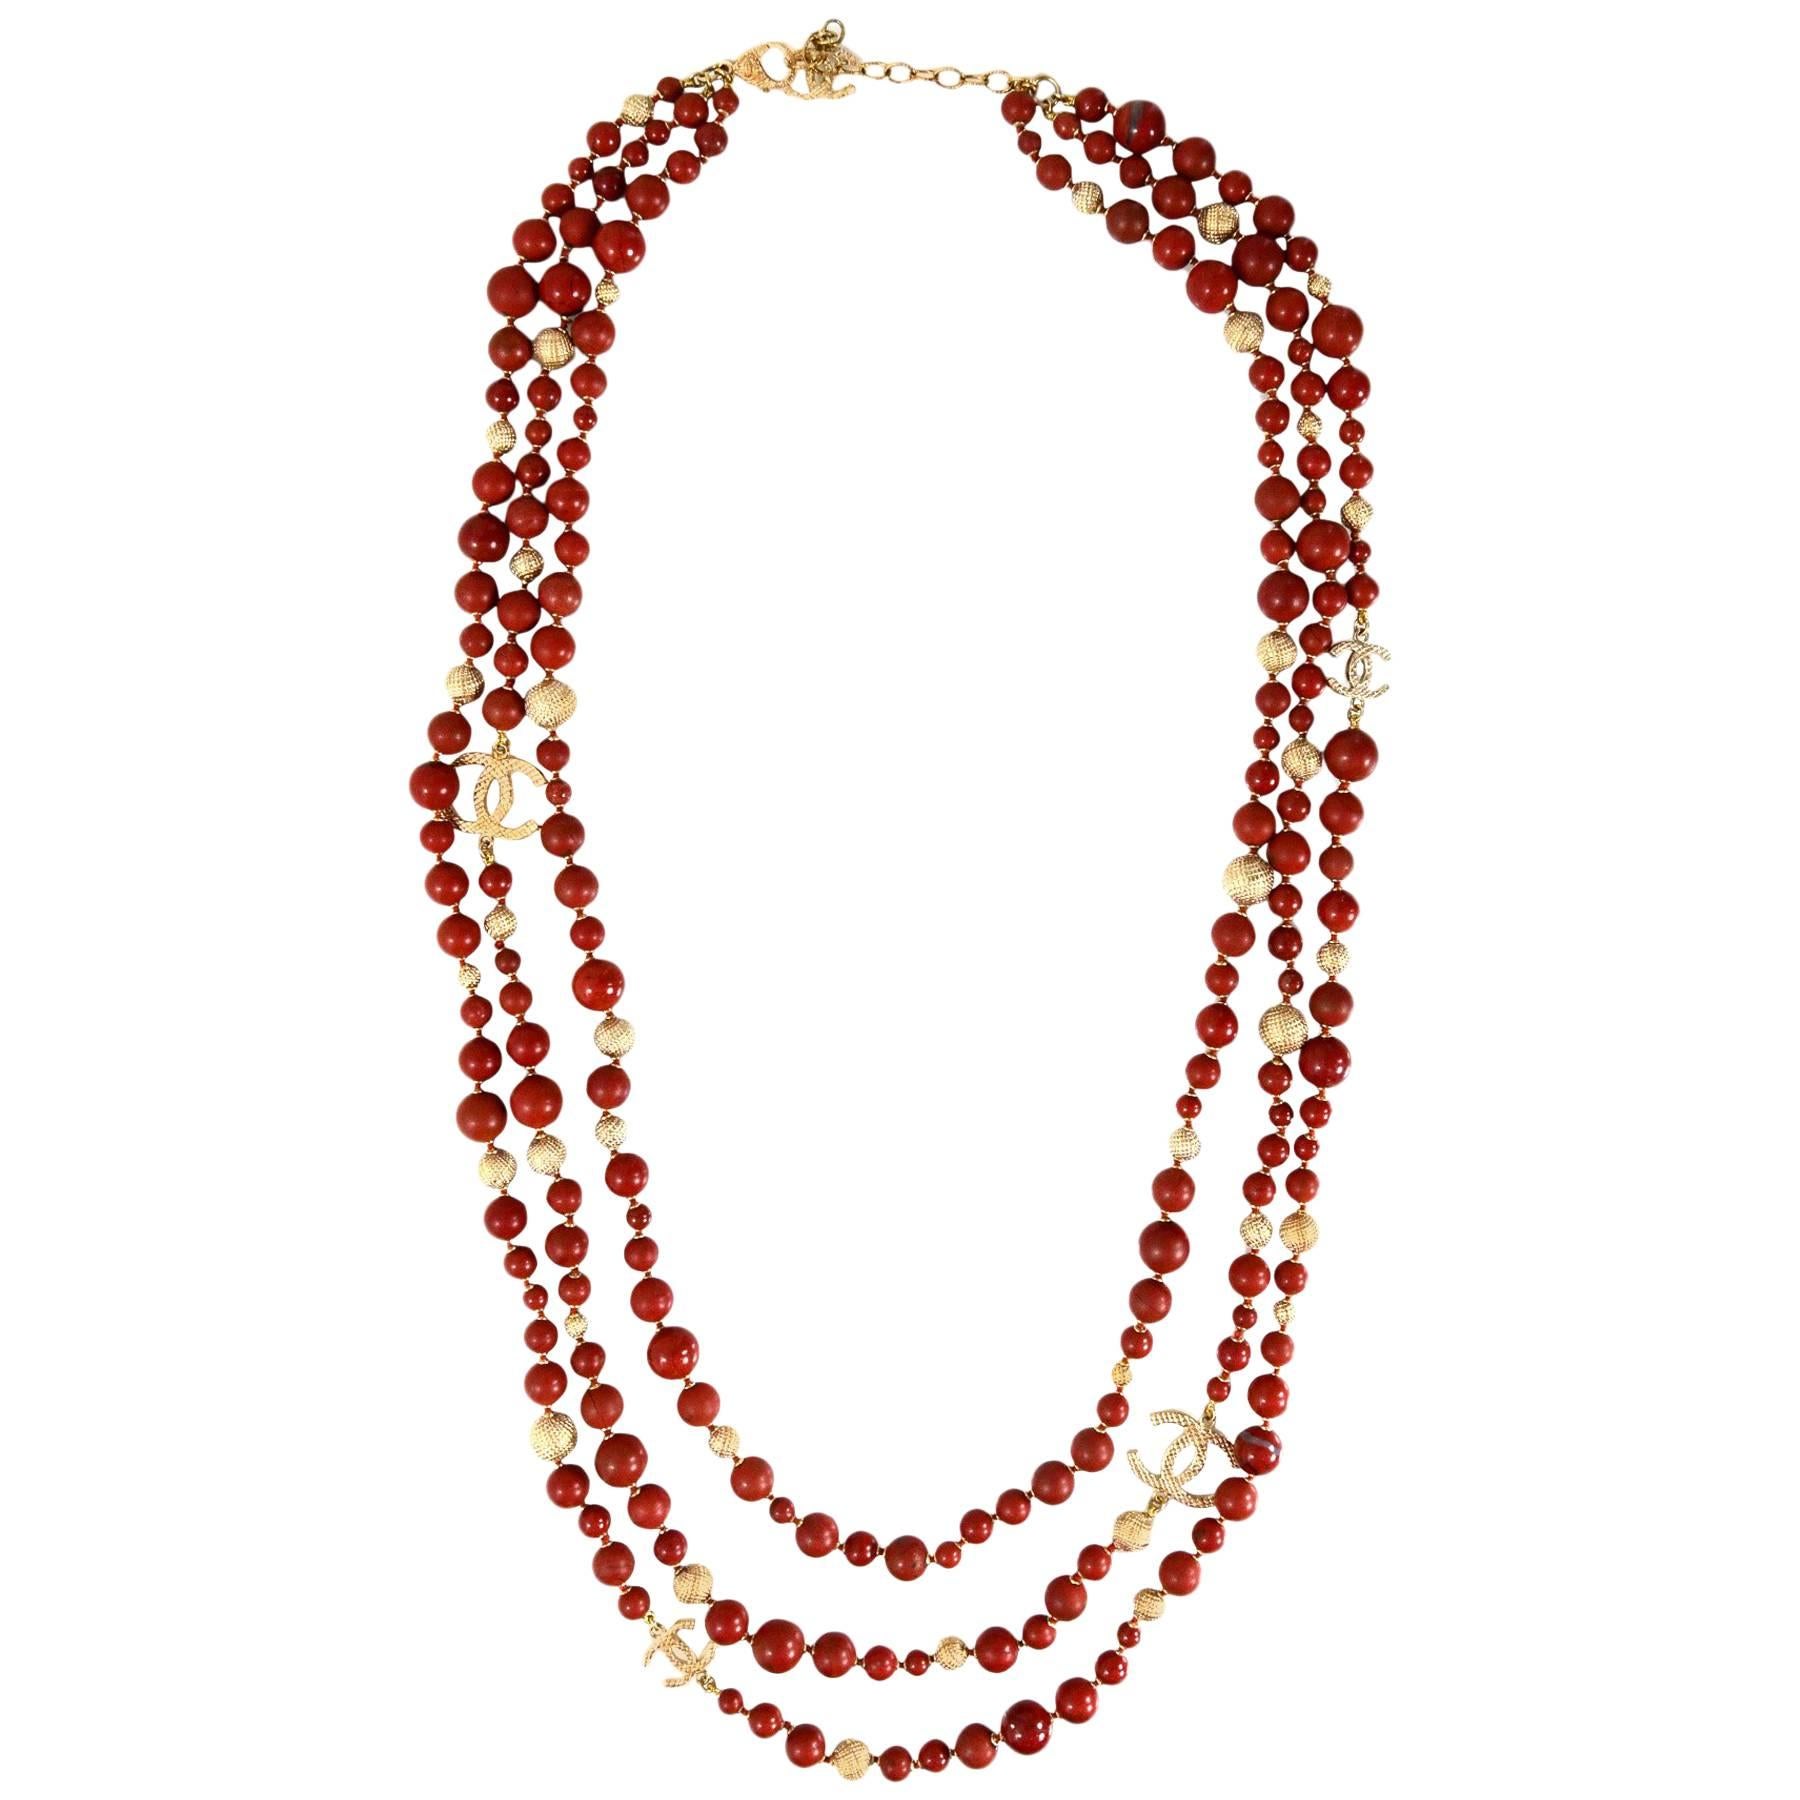 Chanel Pre-Fall '16 Runway Brown Multi-Strand Beaded CC Necklace